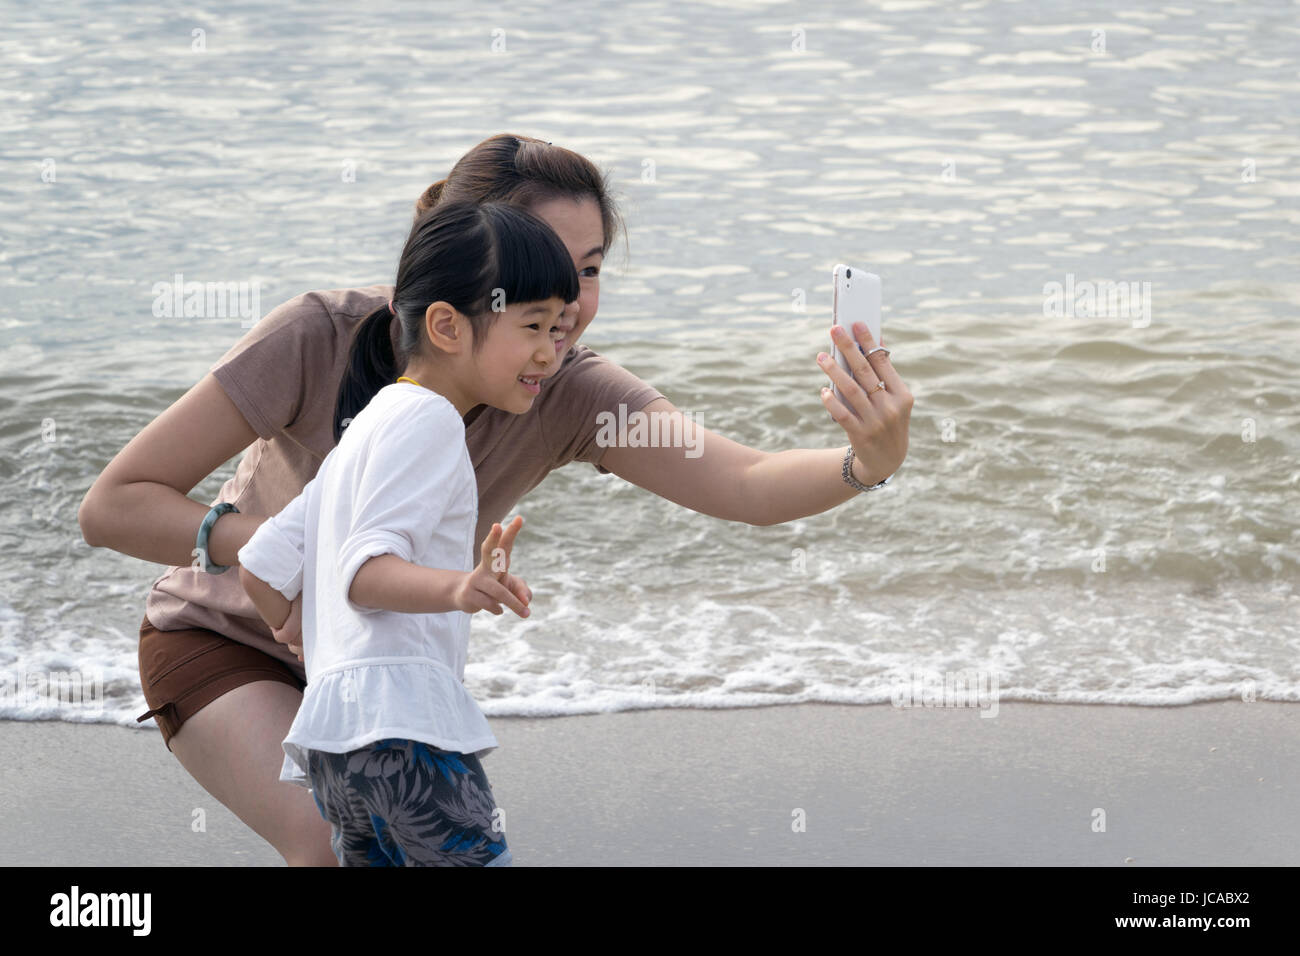 mother and child relationship background Stock Photo